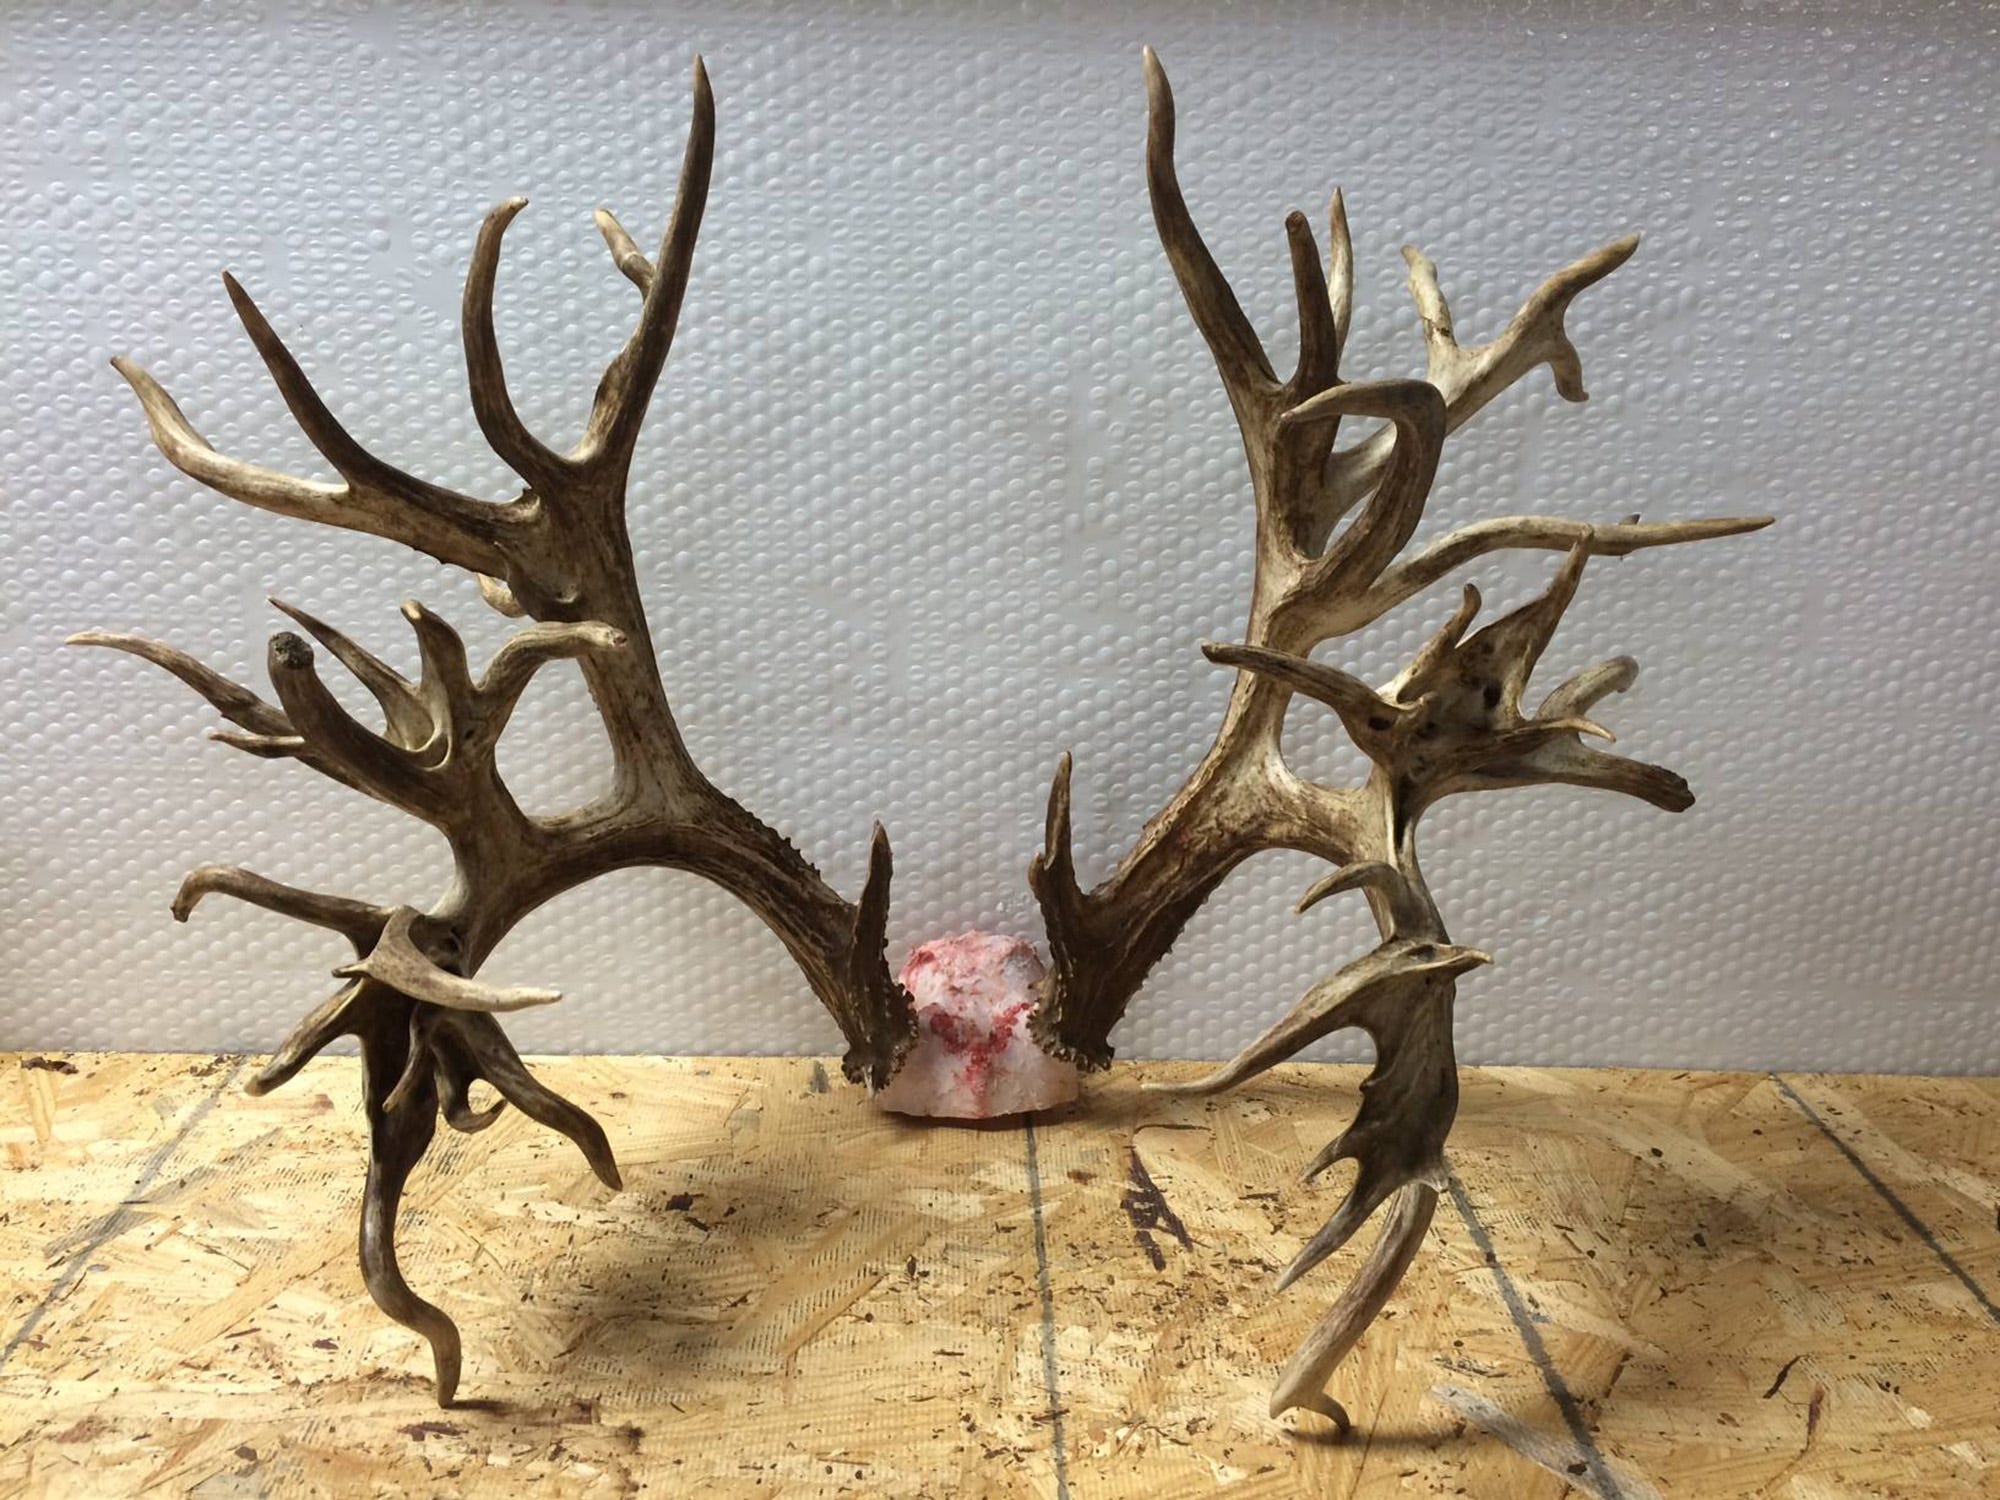 Potential world-record deer antlers 